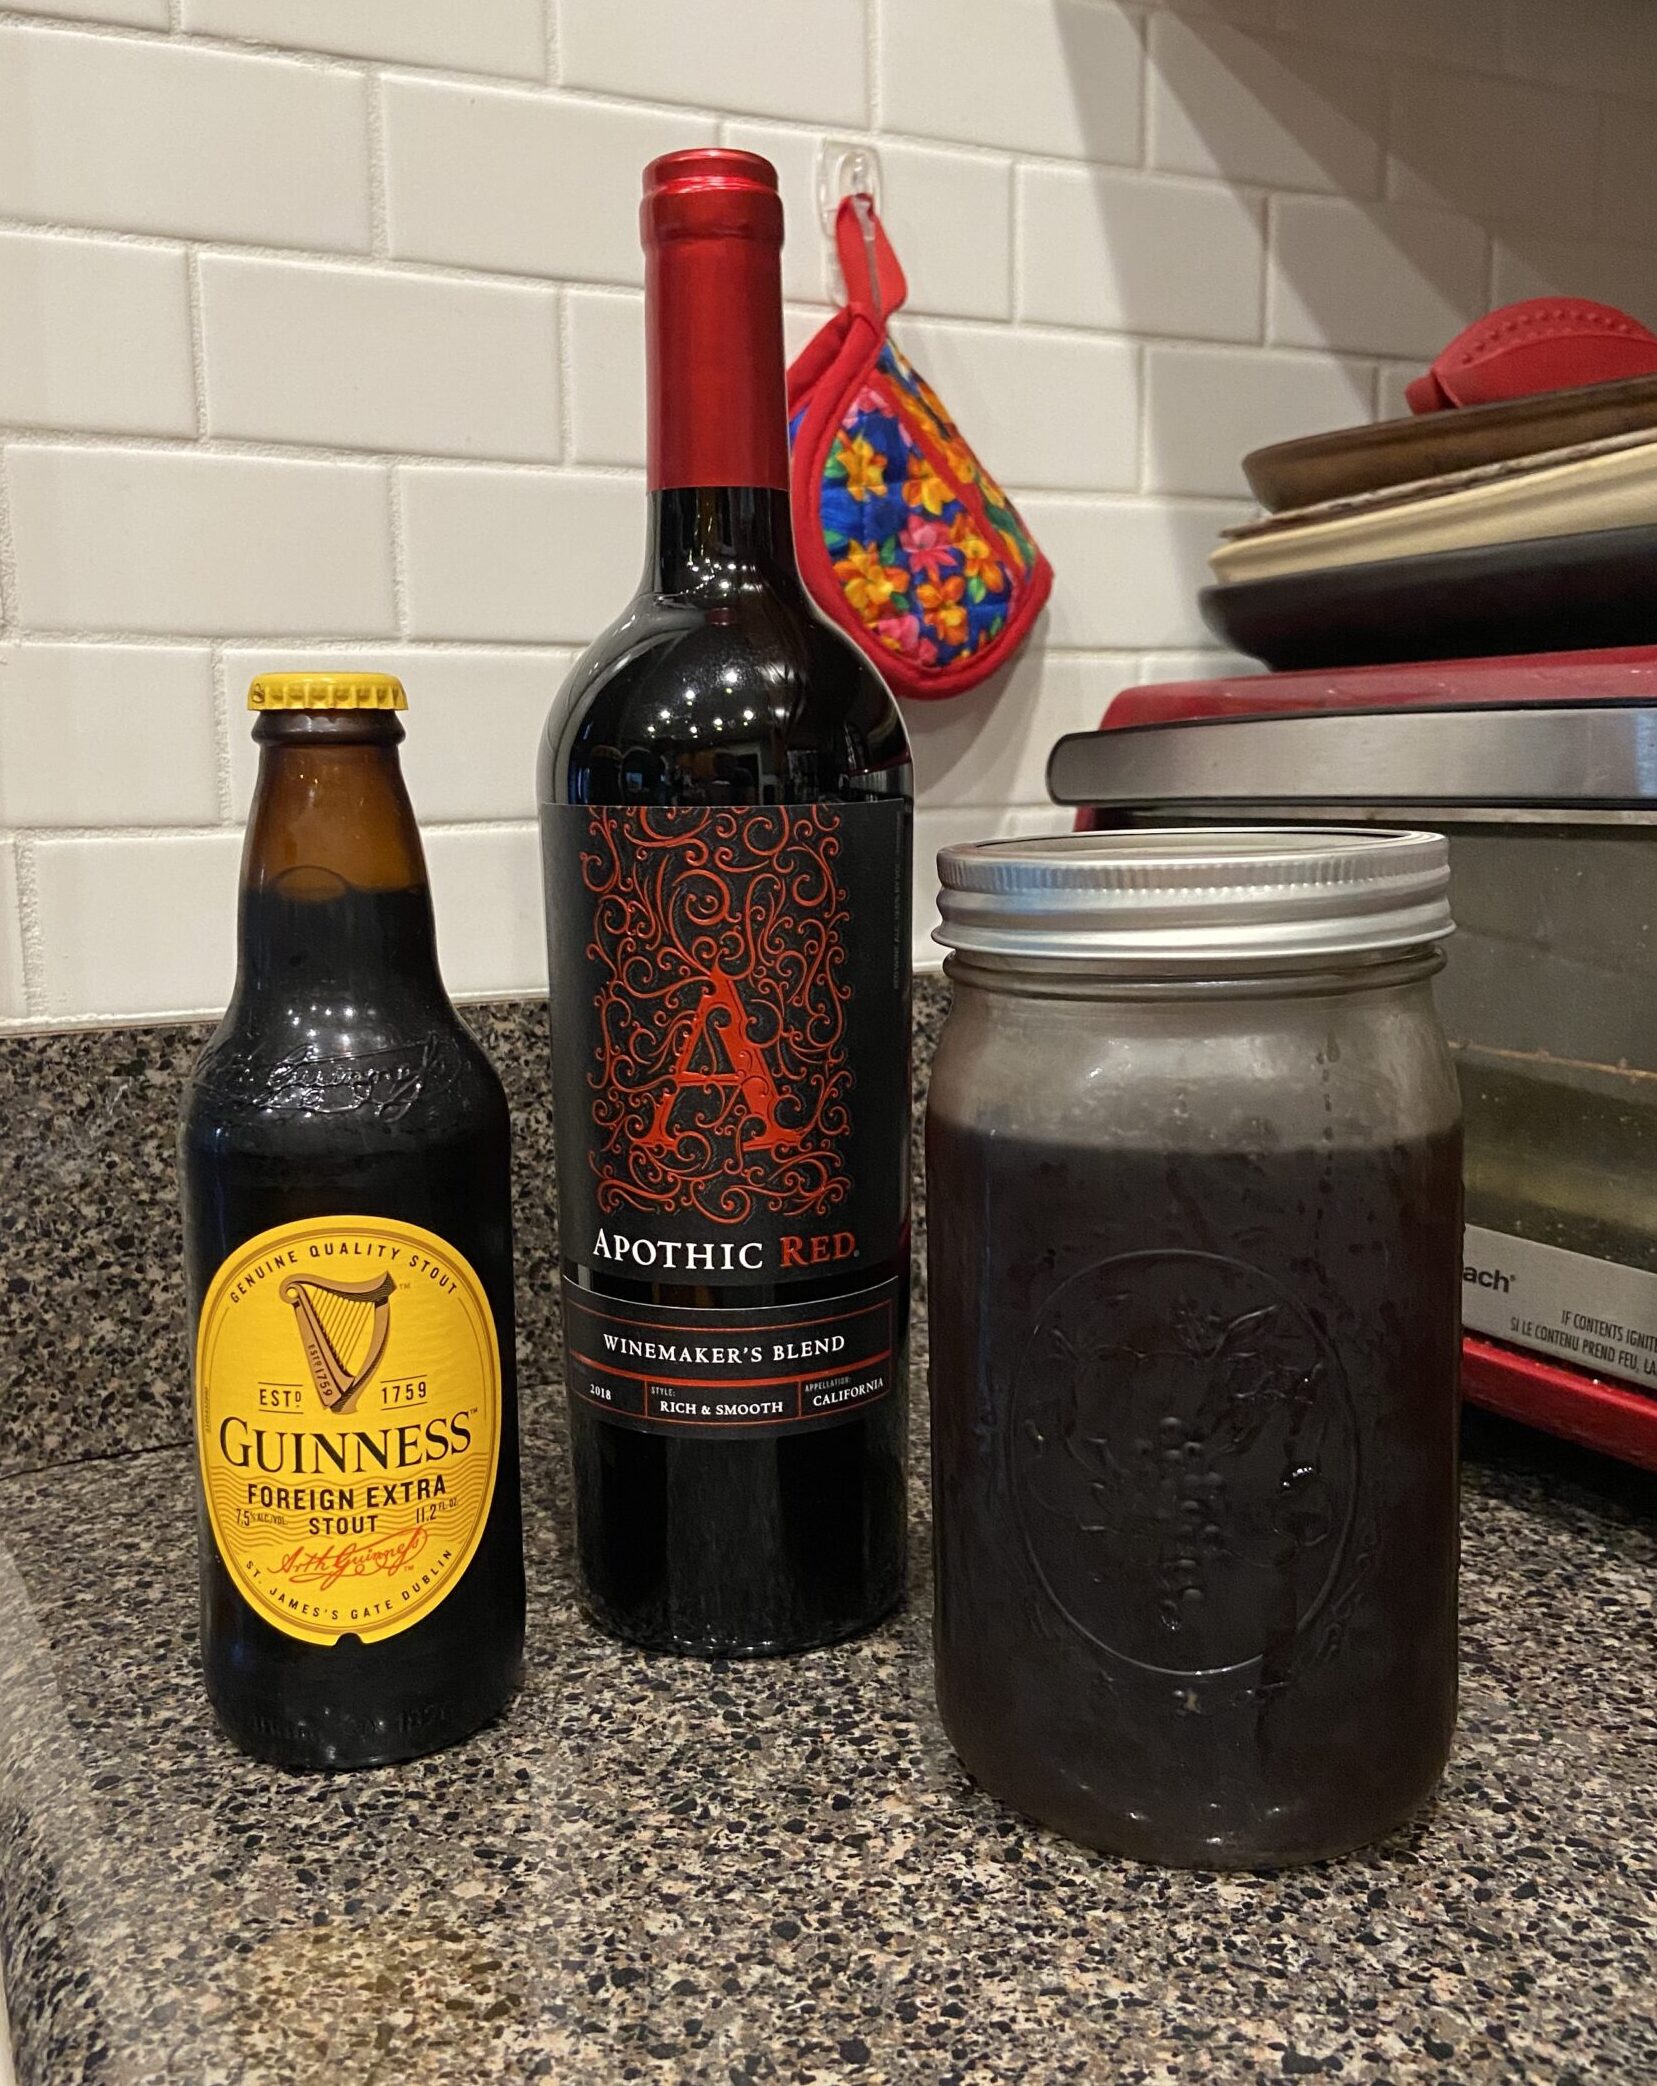 stout, red wine and cold brew coffee